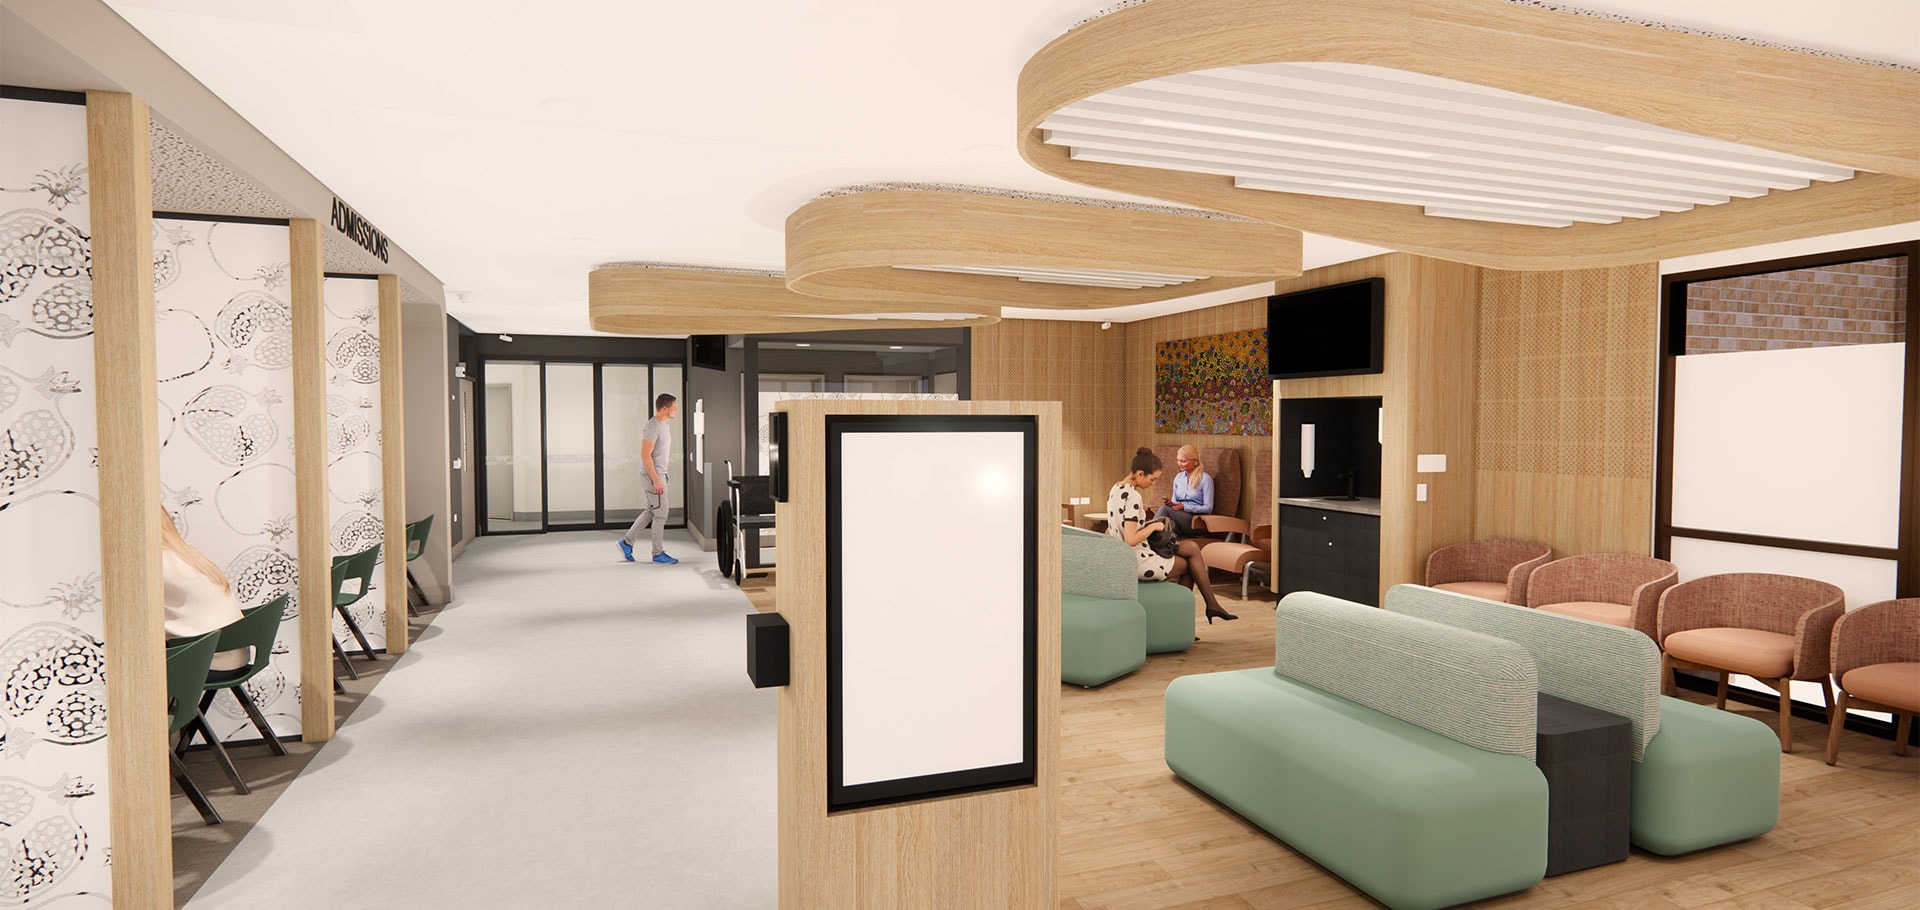 Architect's impression of the emergency department redesign